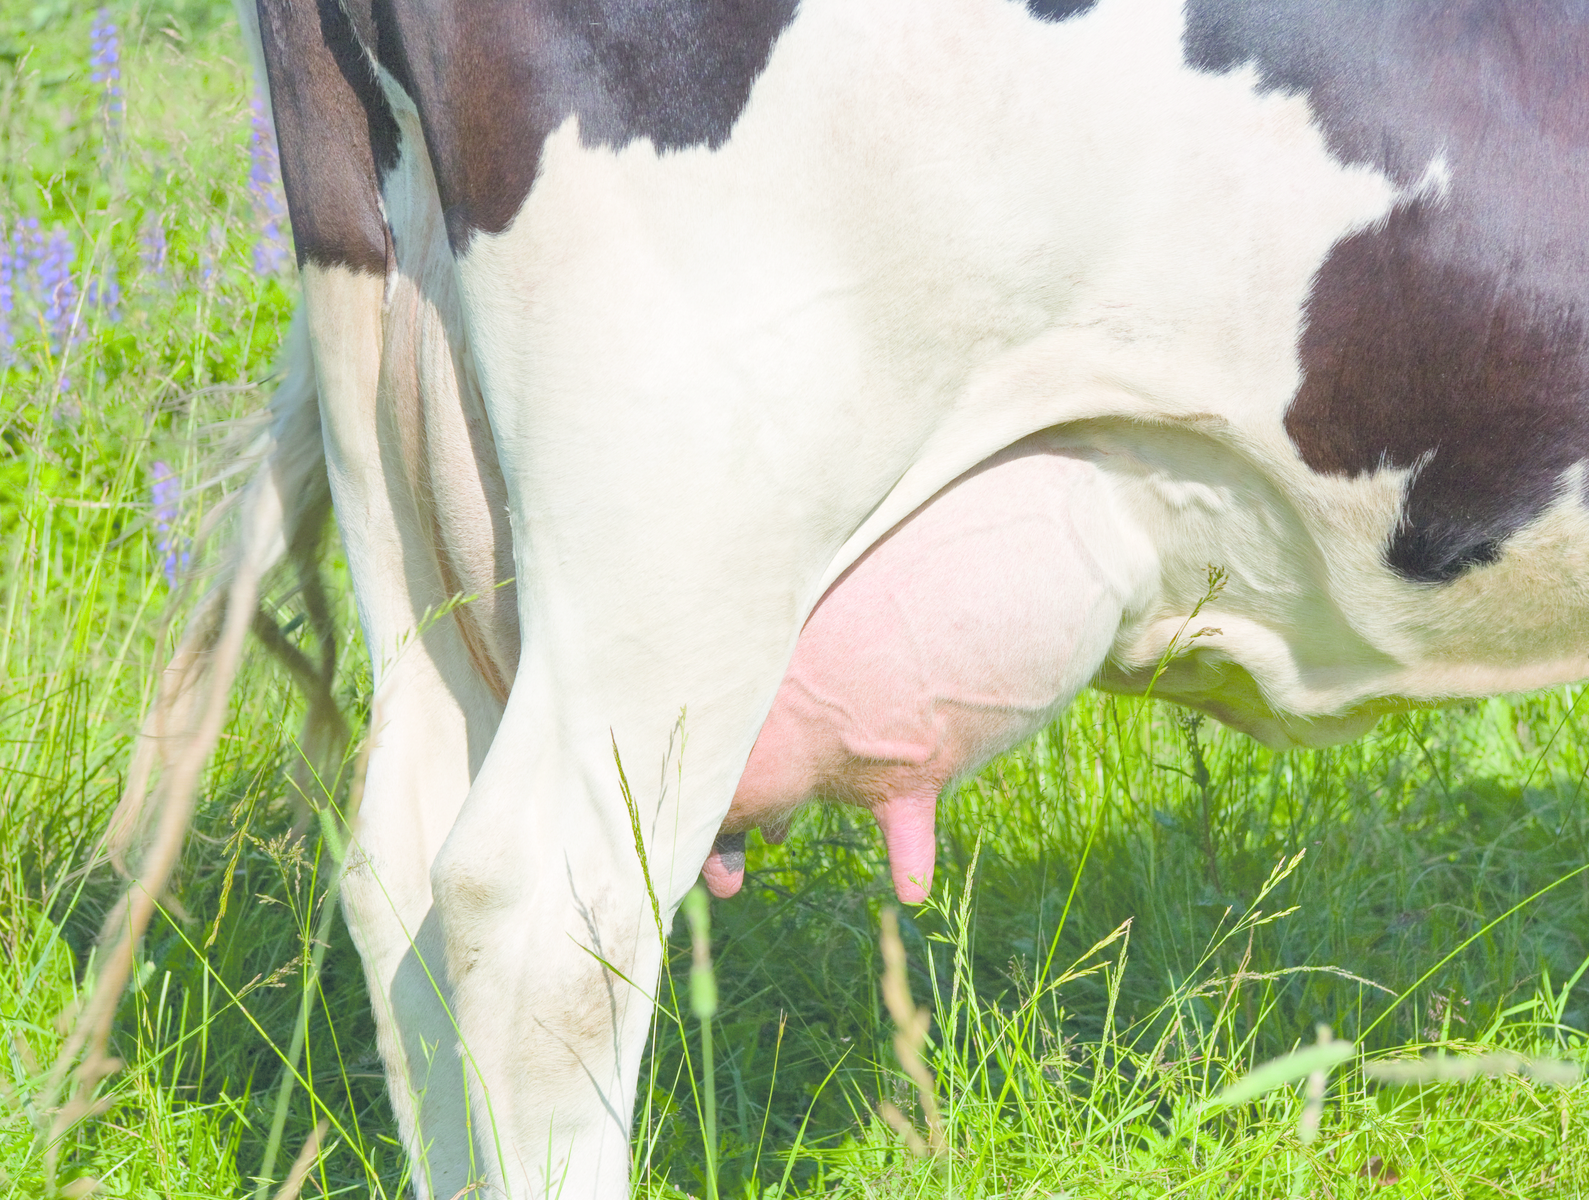 Toxic contamination: Effect on rumen and liver function